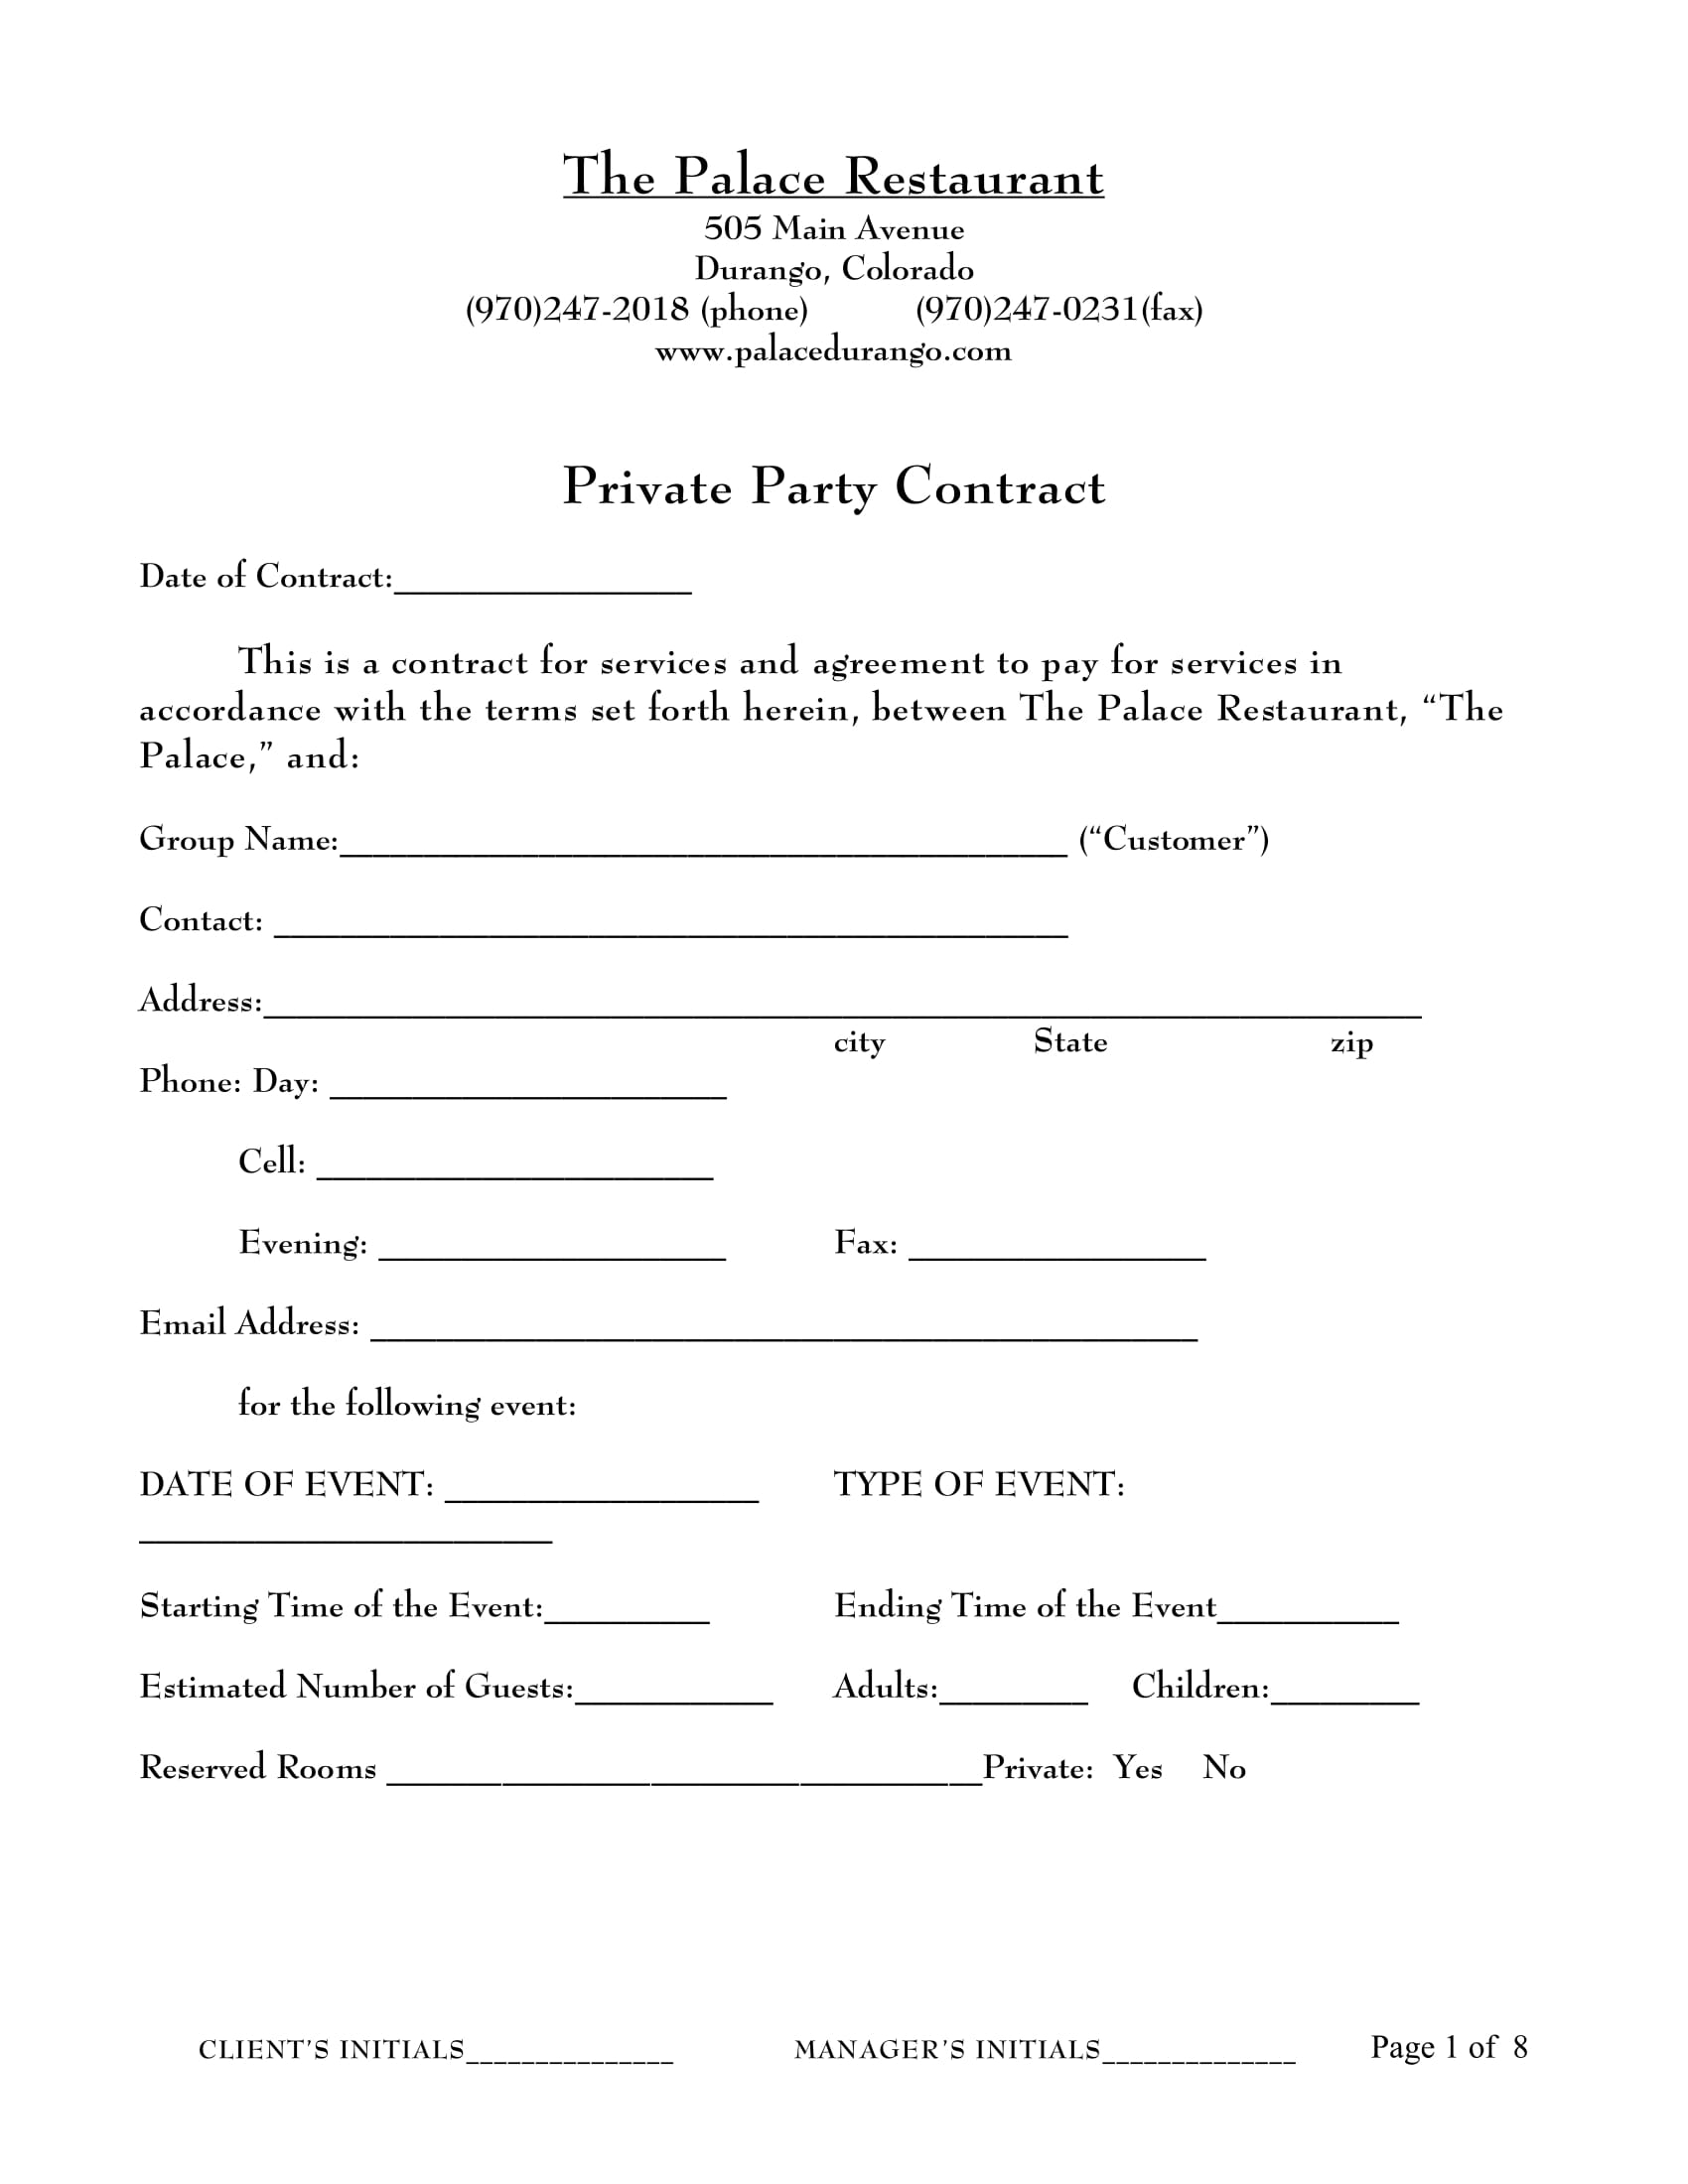 restaurant party contract form 1